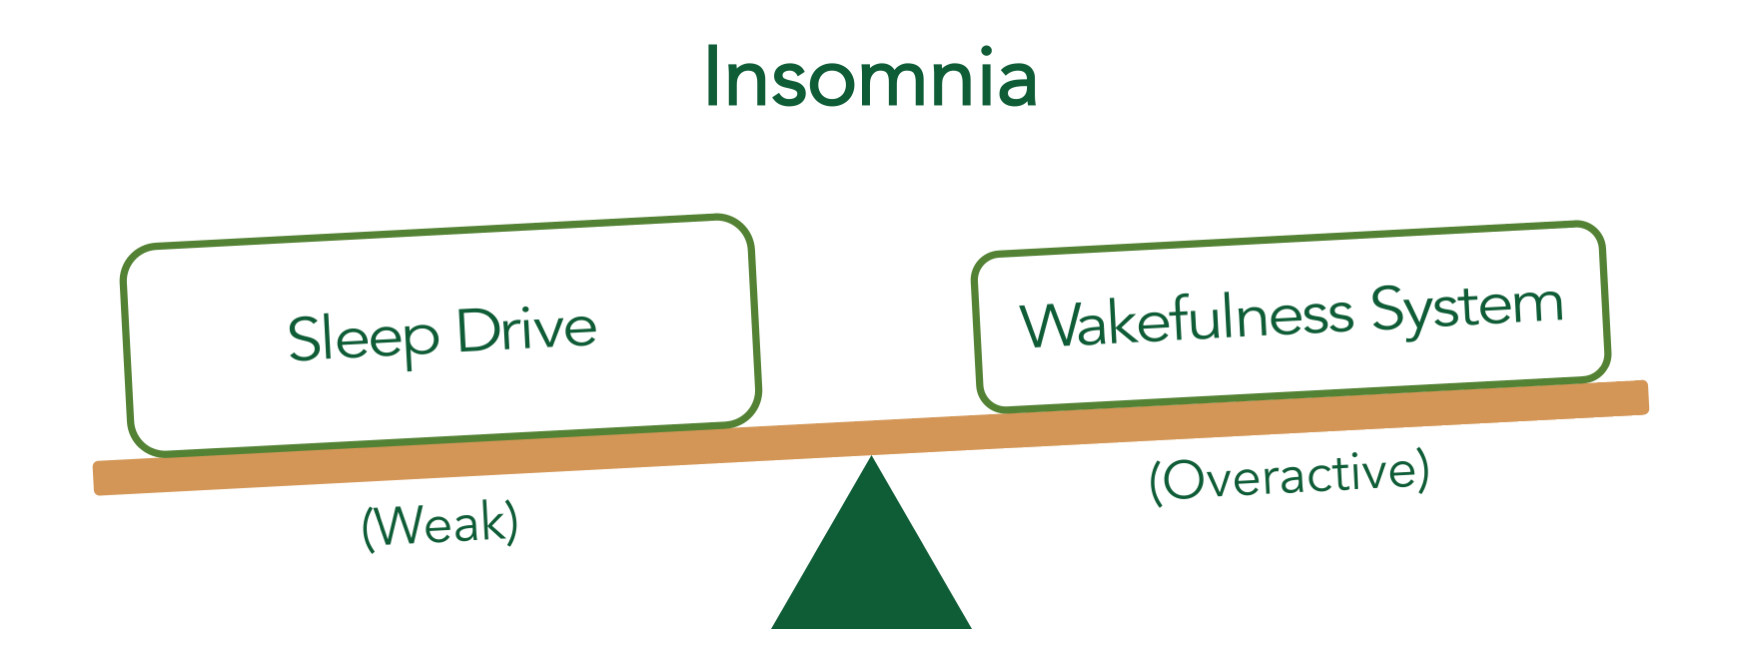 insomnia psychology research paper